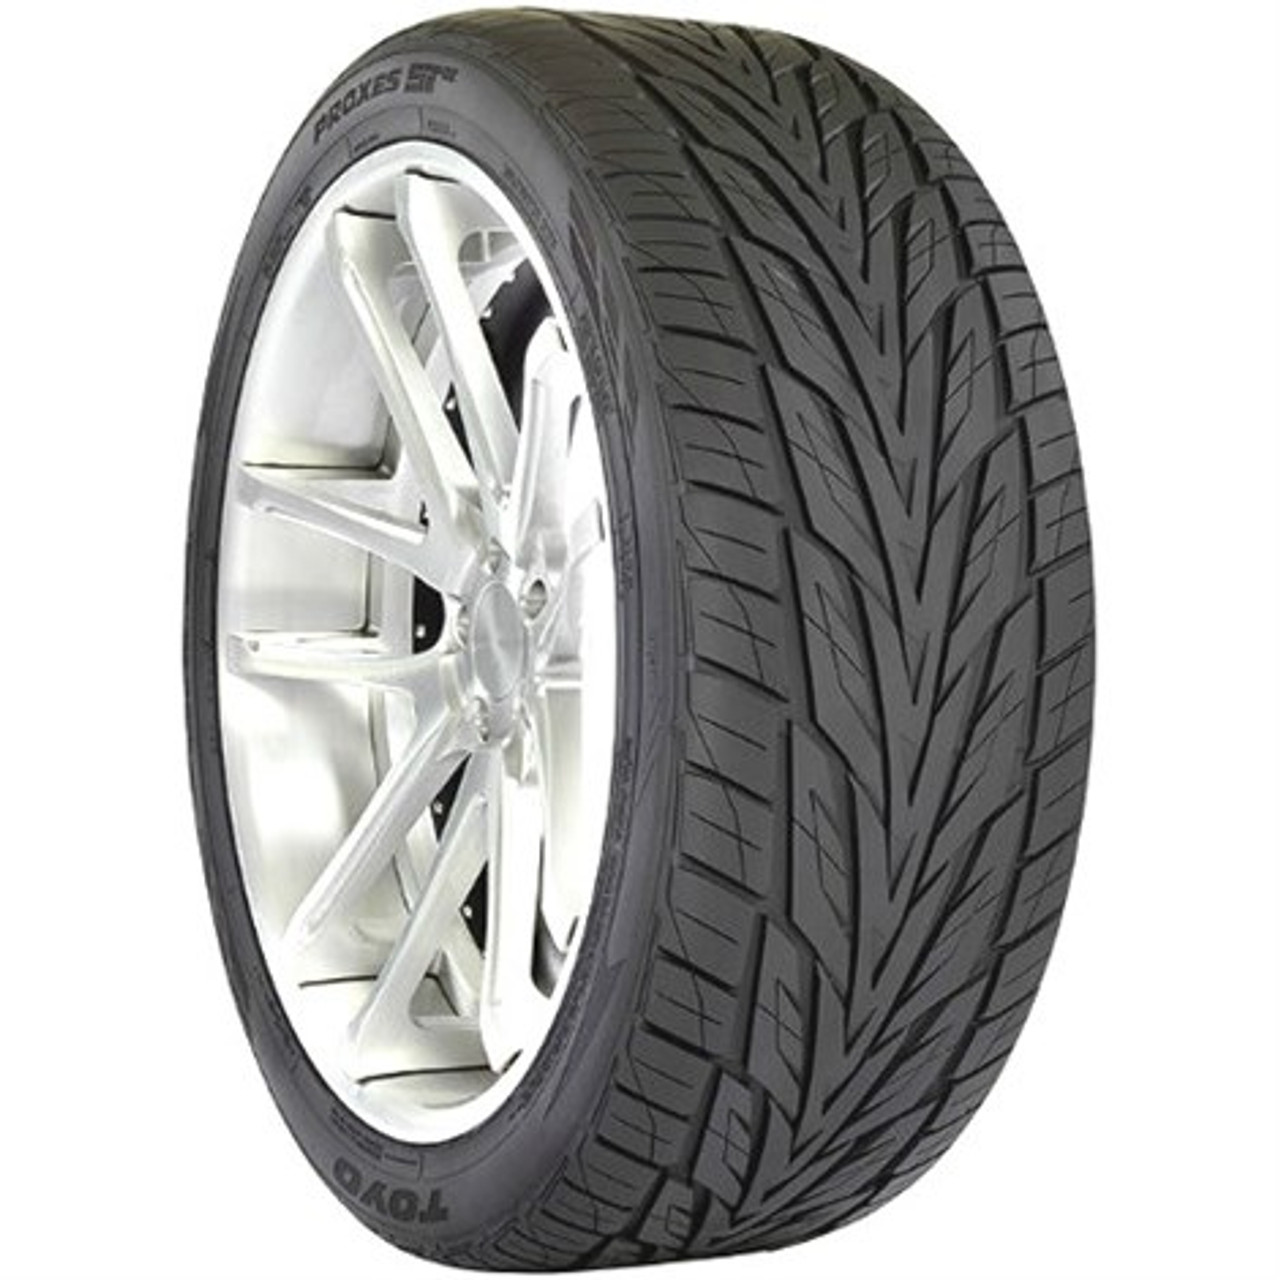 Toyo Proxes ST III Tire - 335/25R22 105W